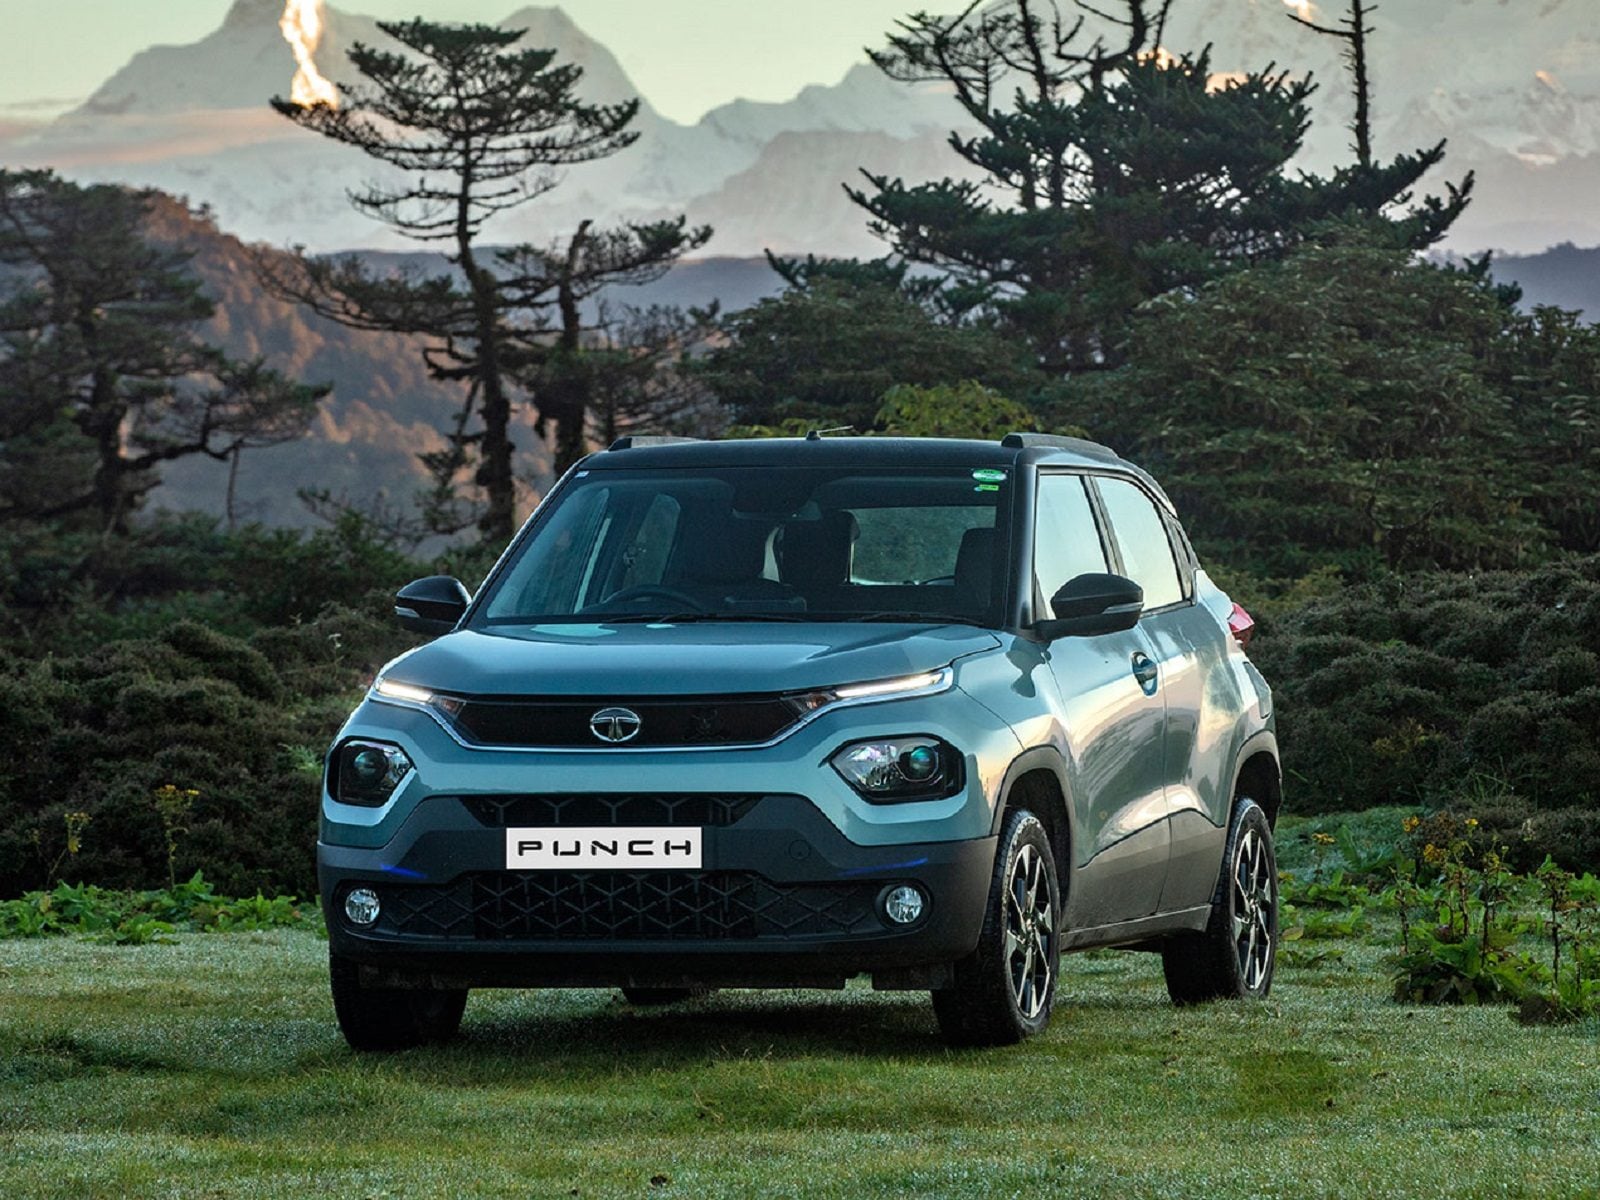 Tata Punch SUV Unveiled for the Indian Market With Four Persona Options, Bookings Open